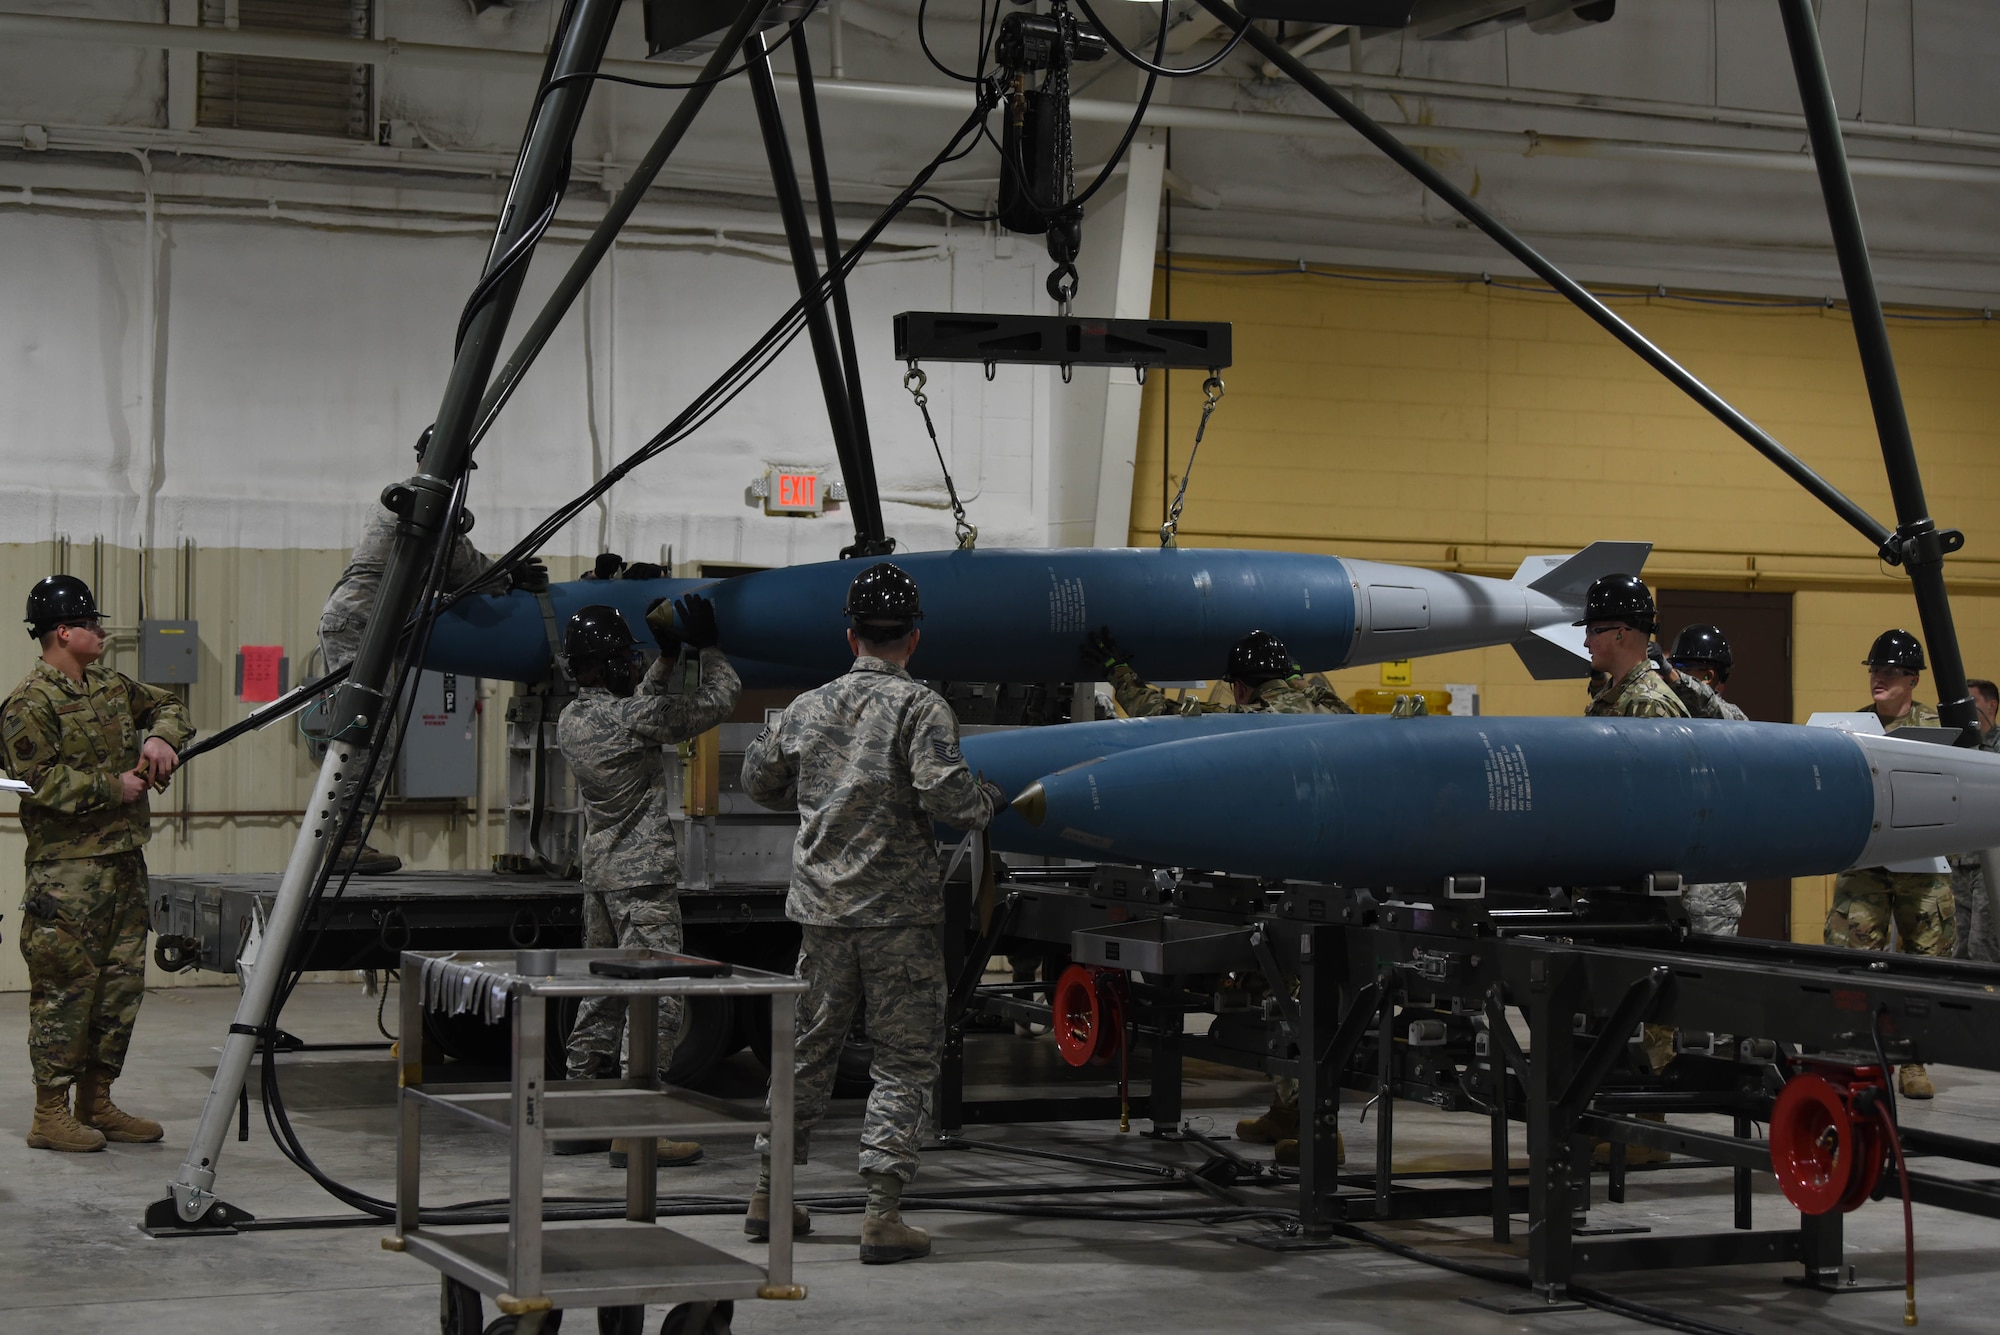 Airmen from the 28th Munitions Squadron lower a completed bomb at Ellsworth Air Force Base S.D., Feb. 5, 2019, during a qualifying round for the second annual Air Force Combat Operations Competition at the major command level. The competition is Air Force-wide and is used to determine the best of the best in munitions operations. (U.S. Air Force photo by Airman John Ennis)